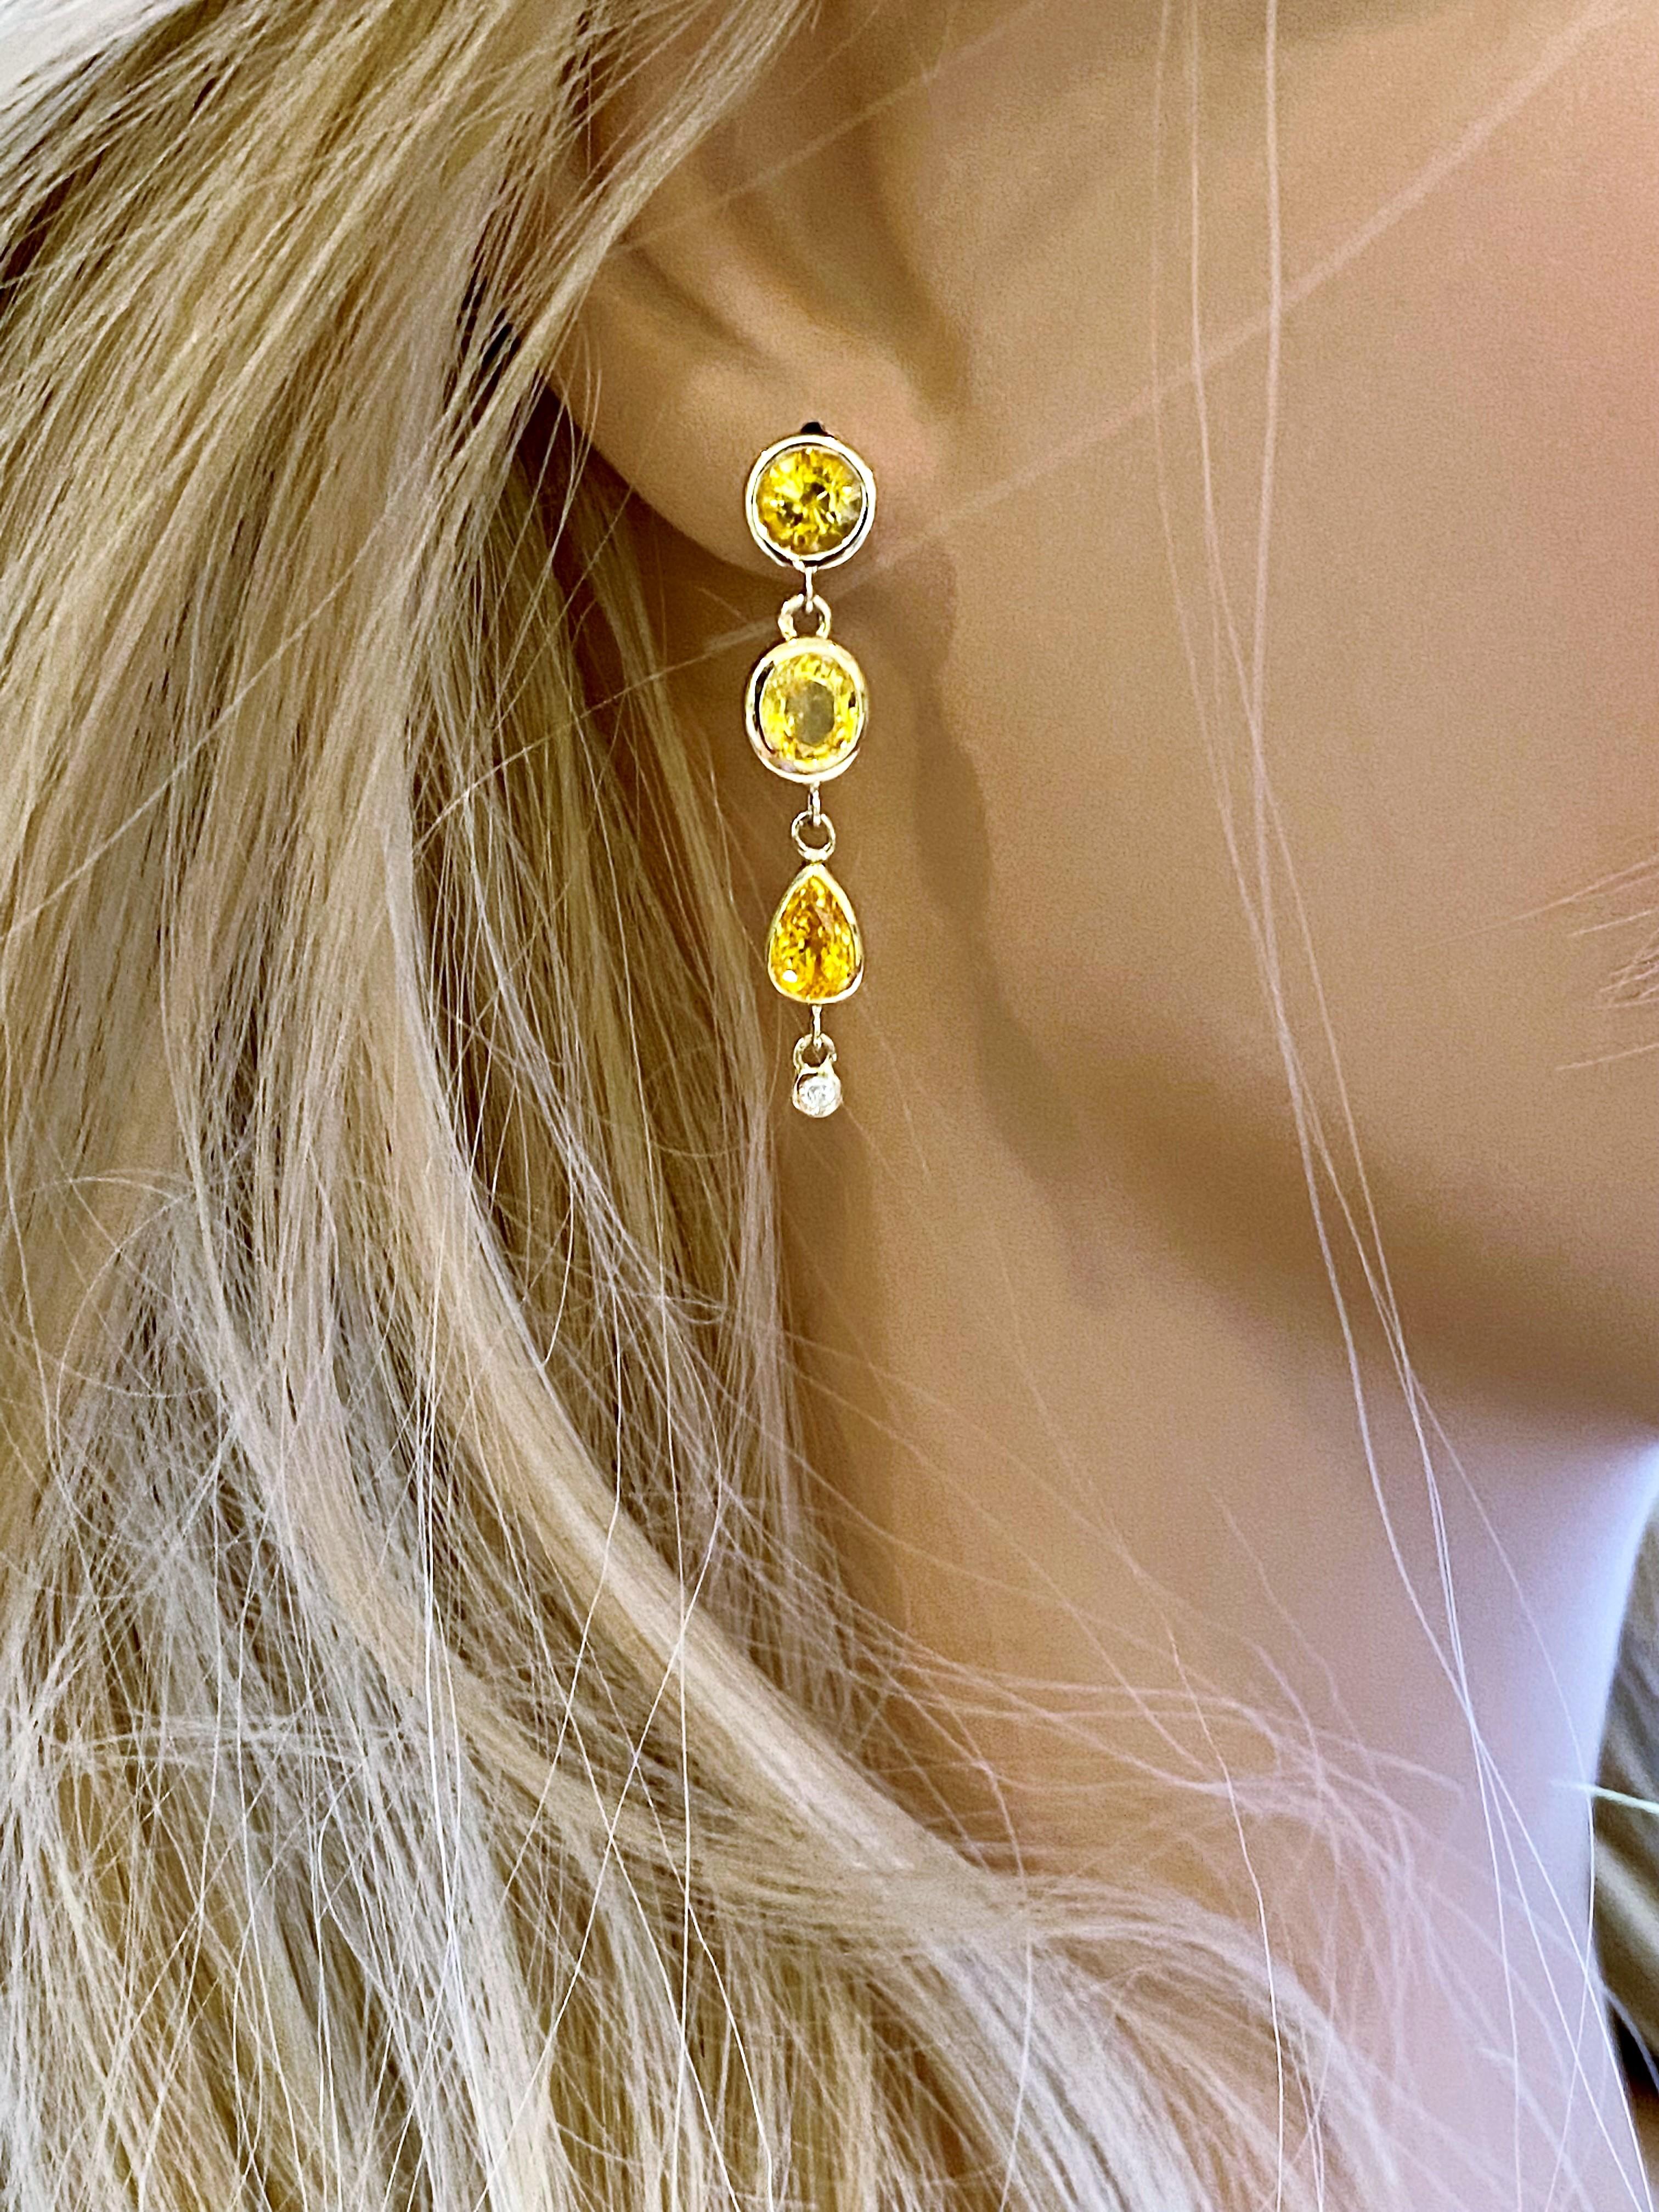 Contemporary Diamond and Yellow Sapphire Gold Drop Earrings Weighing 6.33 Carat